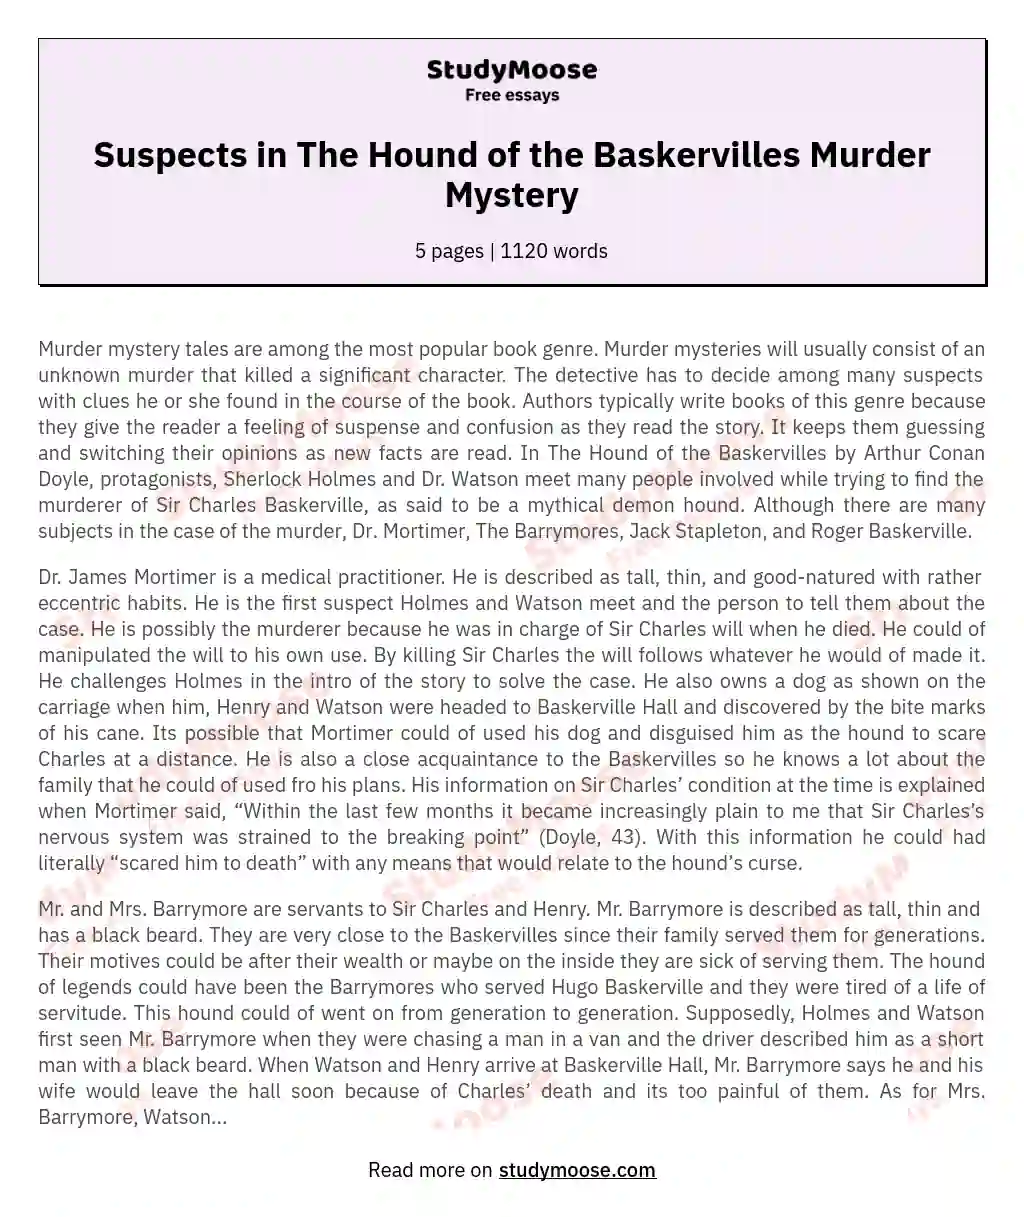 Suspects in The Hound of the Baskervilles Murder Mystery essay